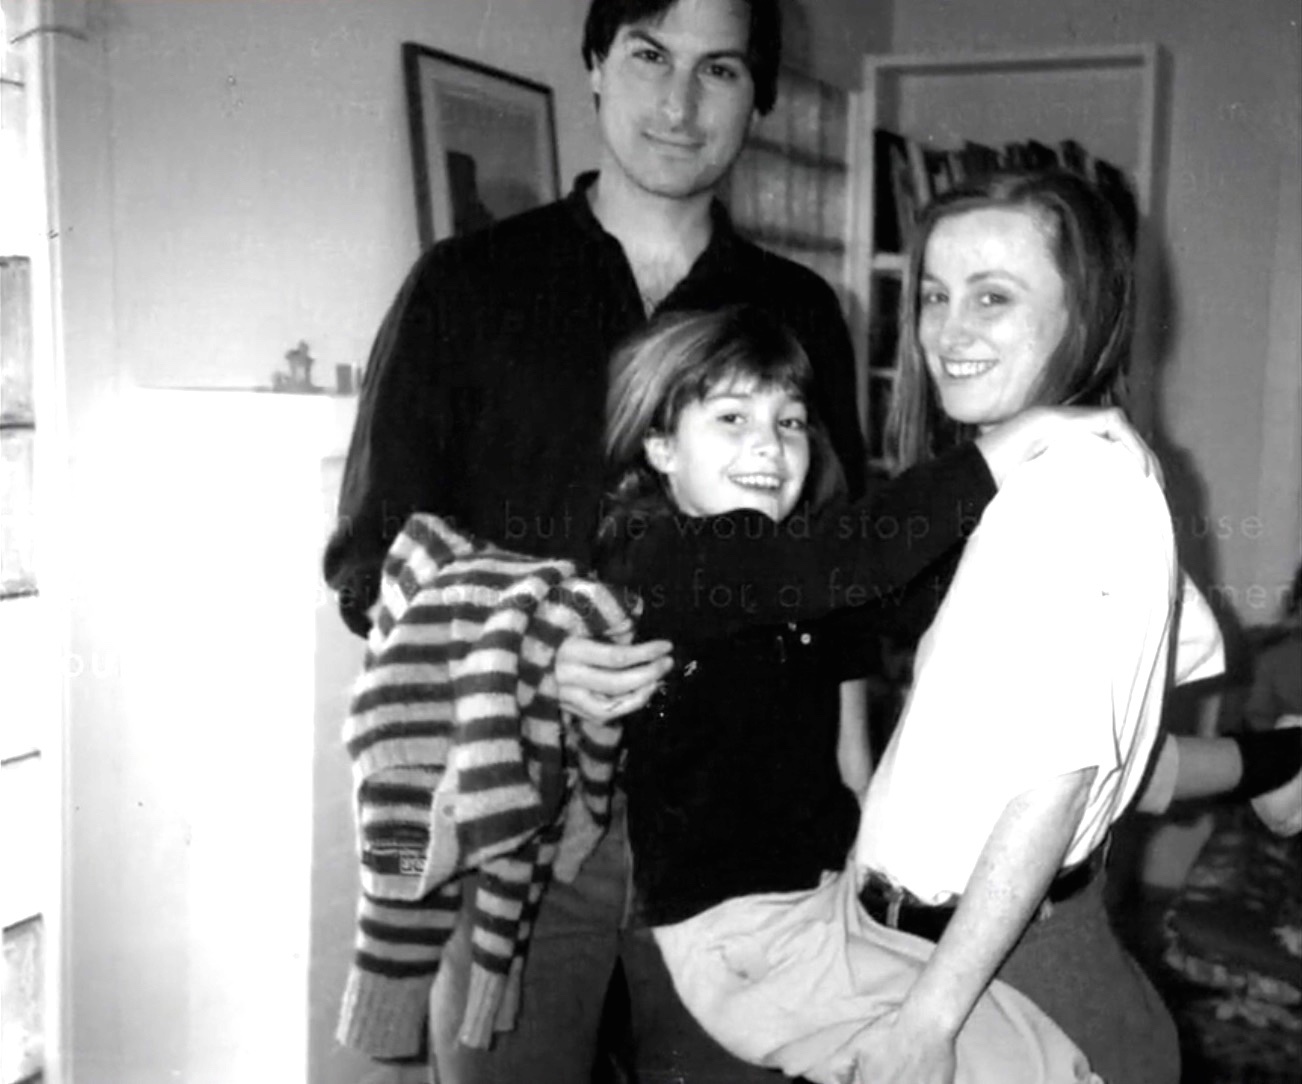 Steve with his daughter Lisa (middle) and his sister Mona Simpson, 1986